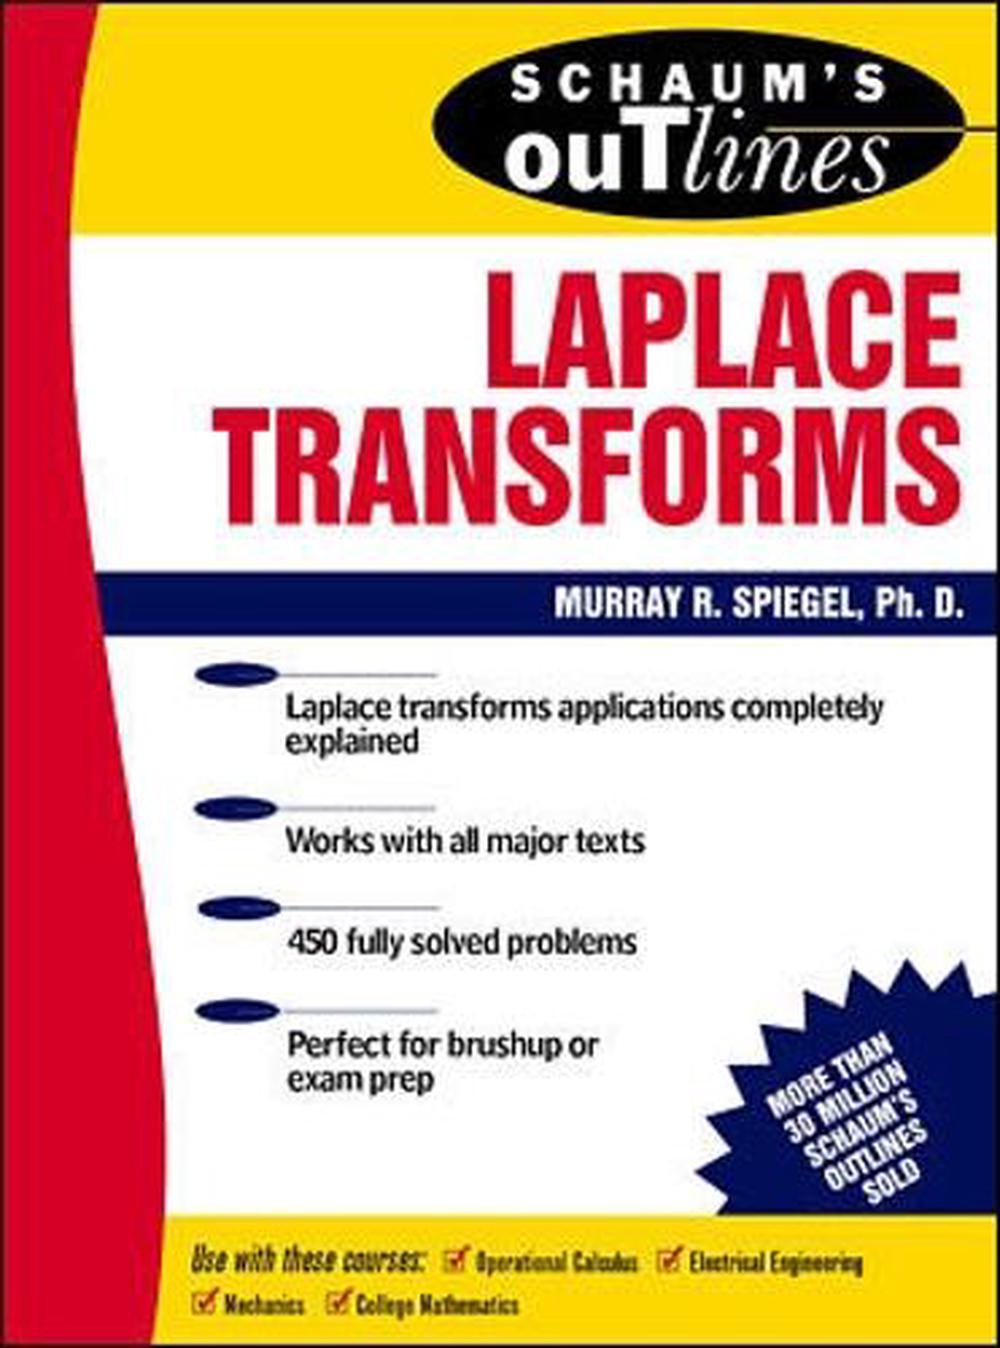 Schaum's Outline of Laplace Transforms by Murray R. Spiegel (English) Paperback 9780070602311 eBay